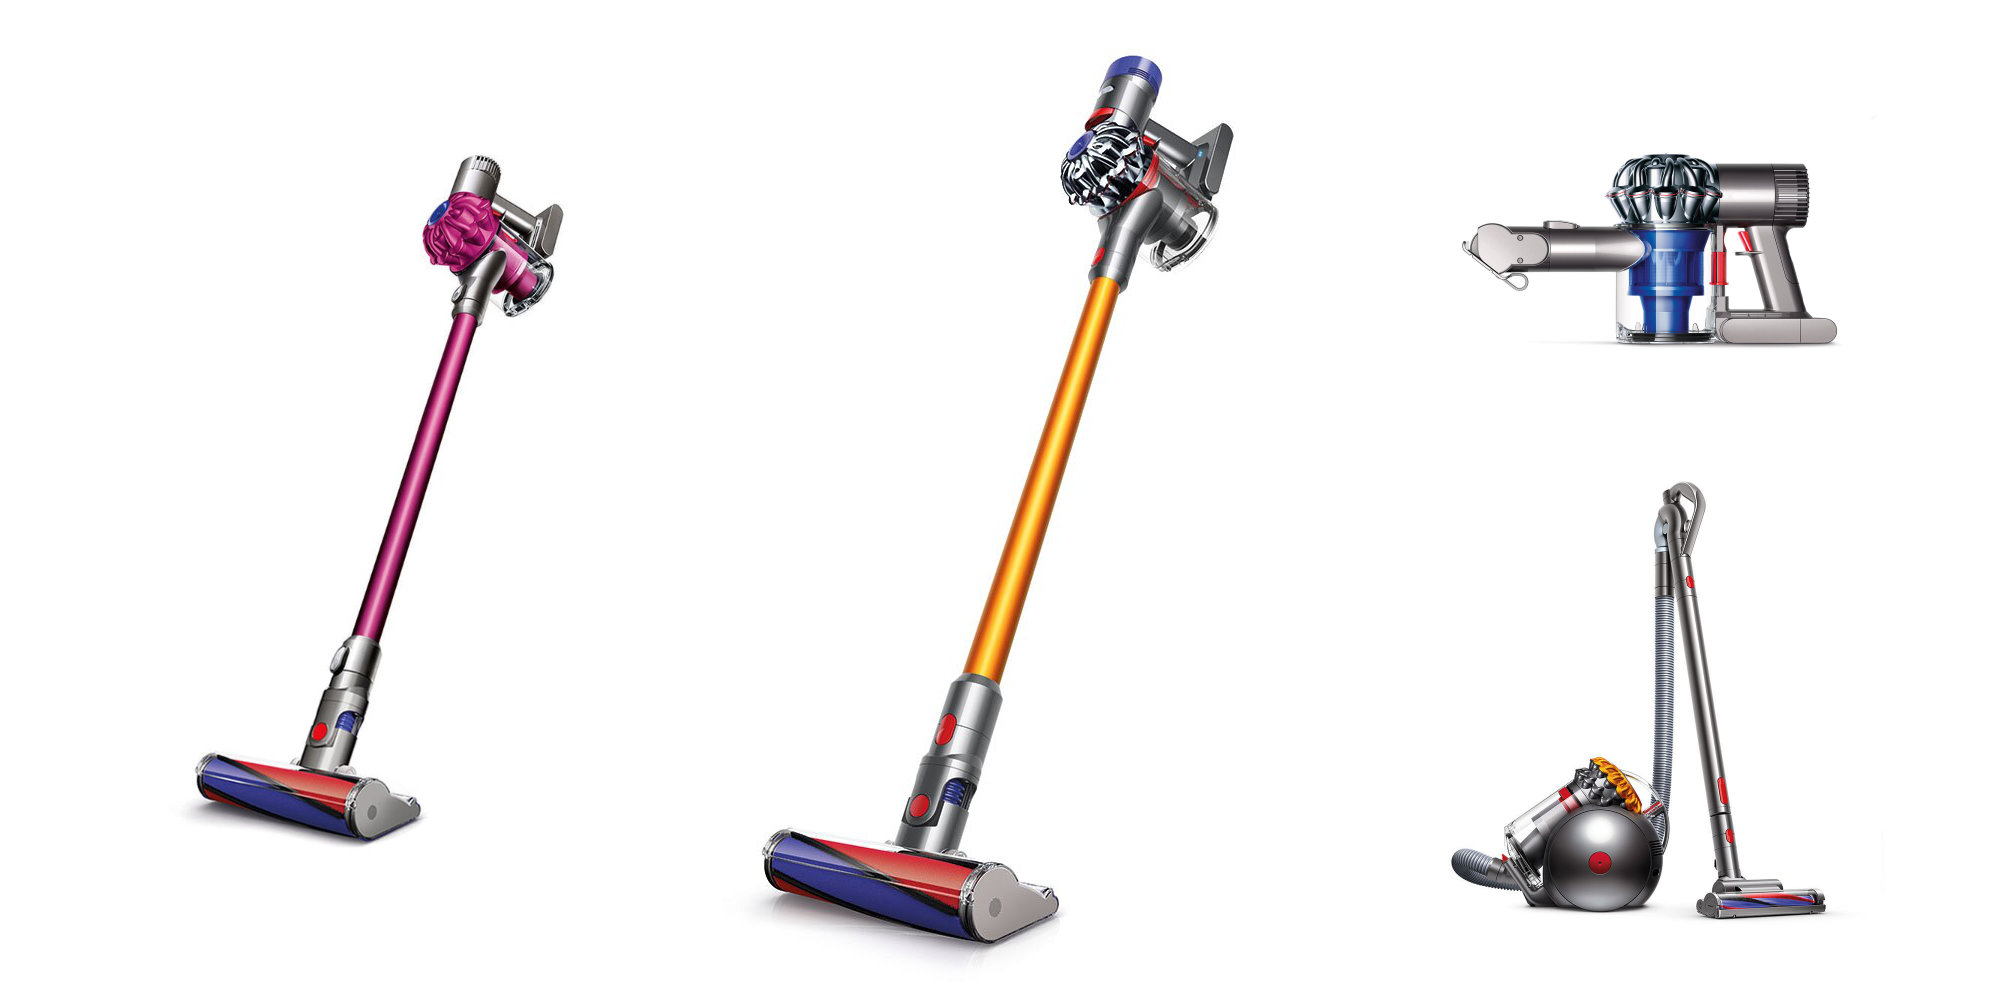 eternal Chalk Respond Dyson Vacuum Sale: V8 Absolute Stick $220 (Refurb, Orig. $599), more from  $96